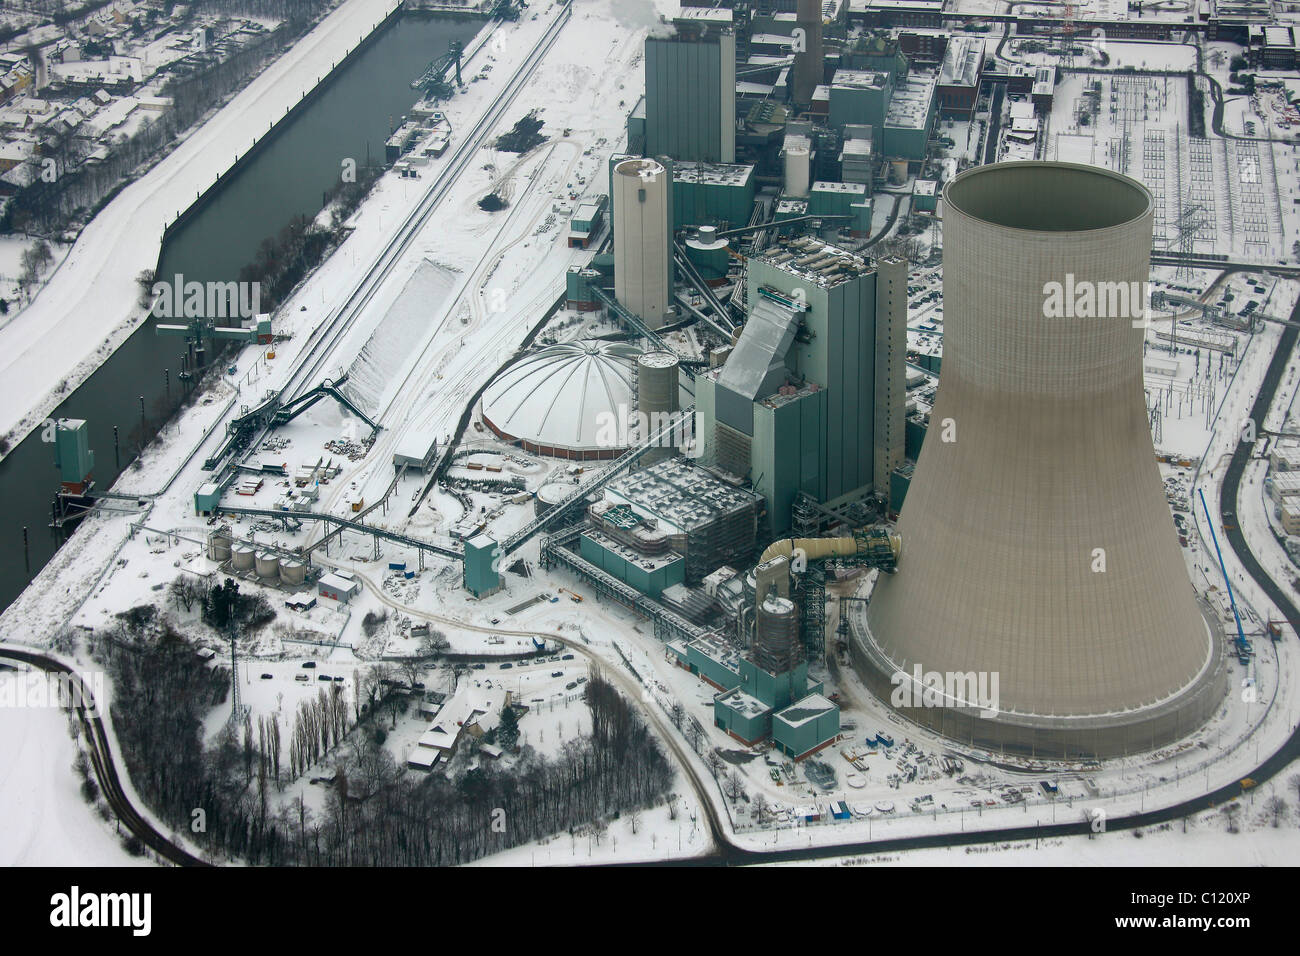 Aerial photo, cooling towers, construction site, Walsum Steal EVONIK STEAG coal power station, Snow, Duisburg, Rhein Stock Photo